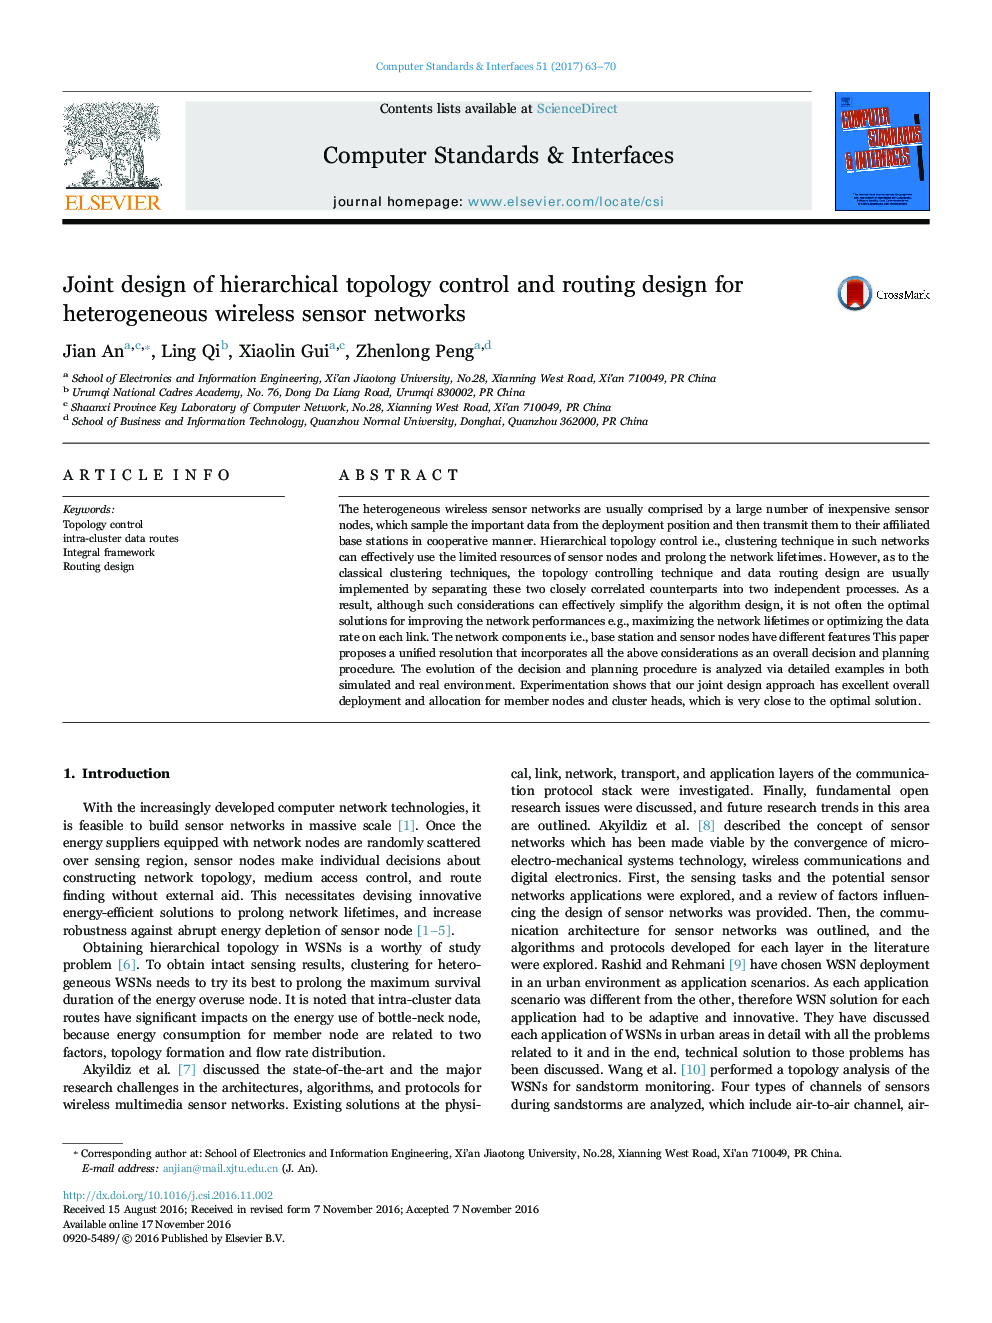 Joint design of hierarchical topology control and routing design for heterogeneous wireless sensor networks